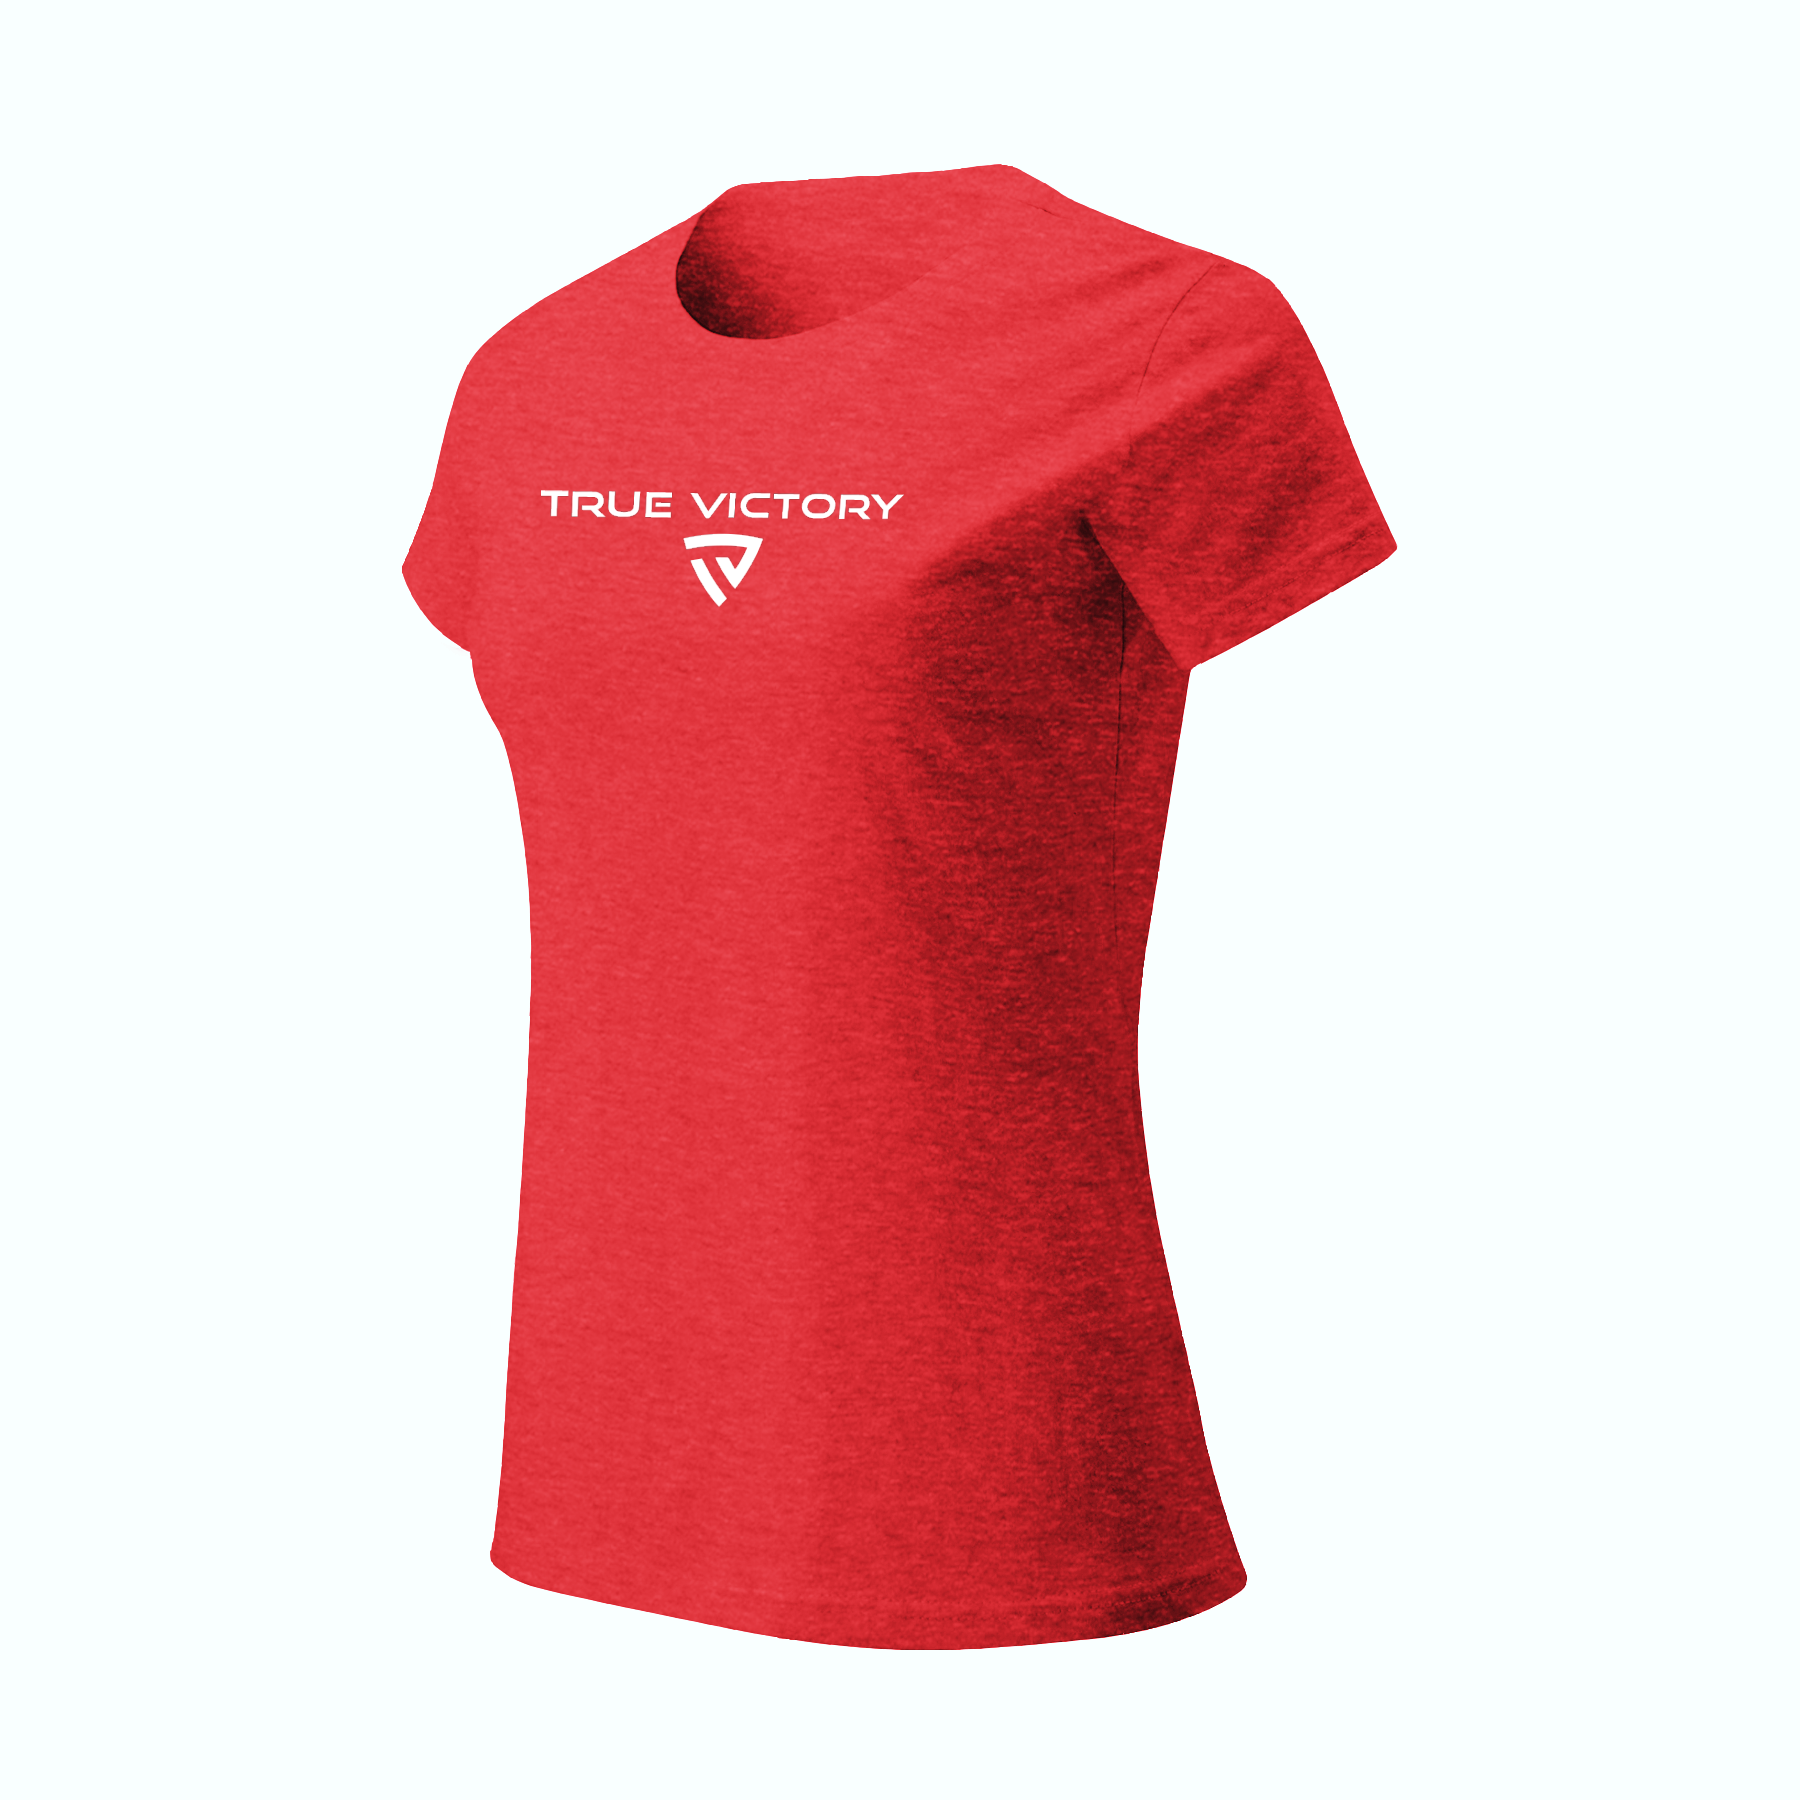 Women's Victorious Red Tee